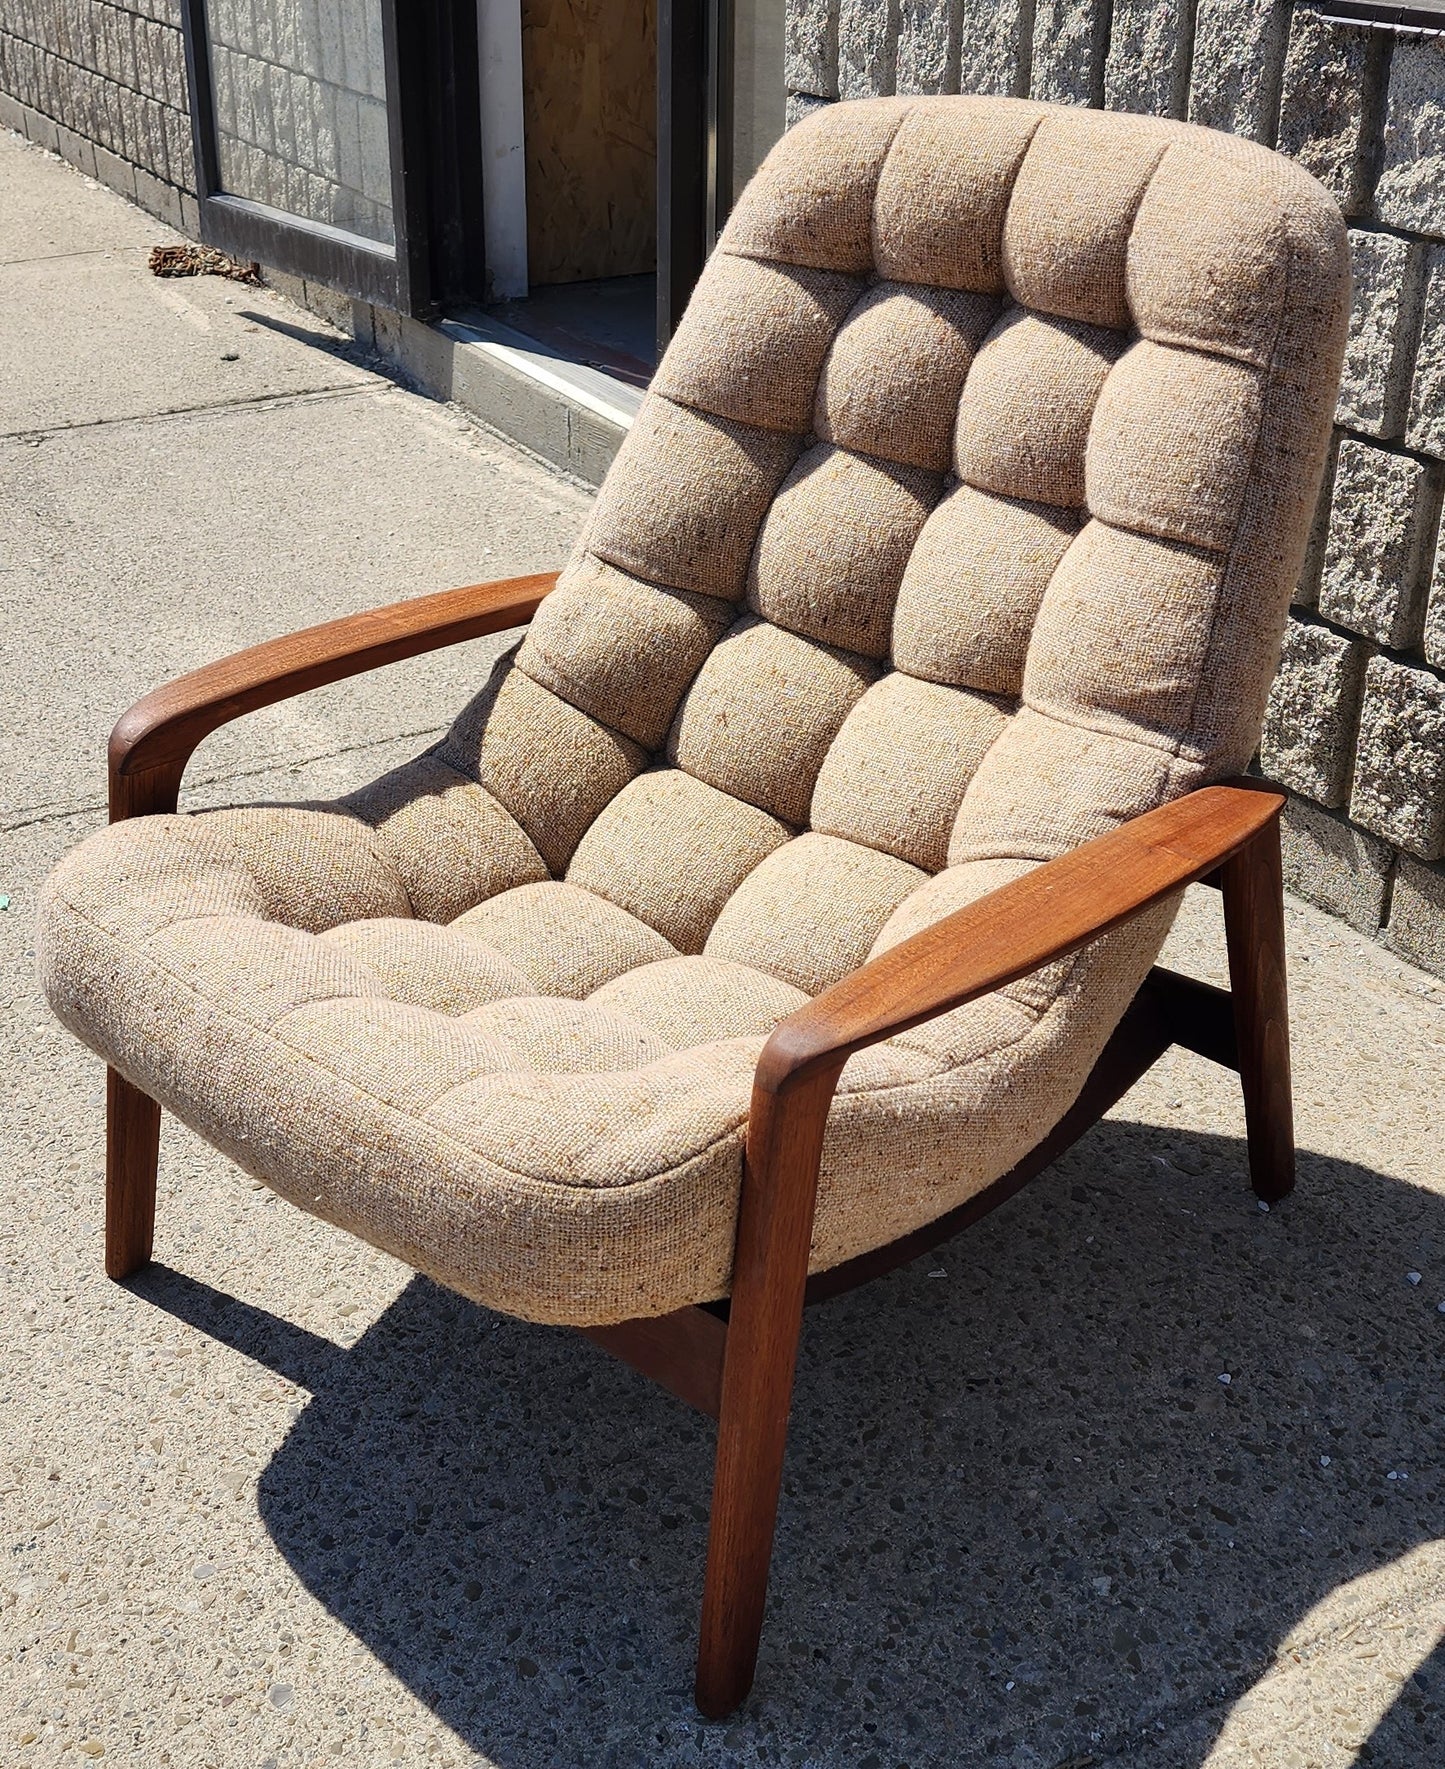 REFINISHED Mid Century Modern Teak Scoop Lounge Chair by R.Huber